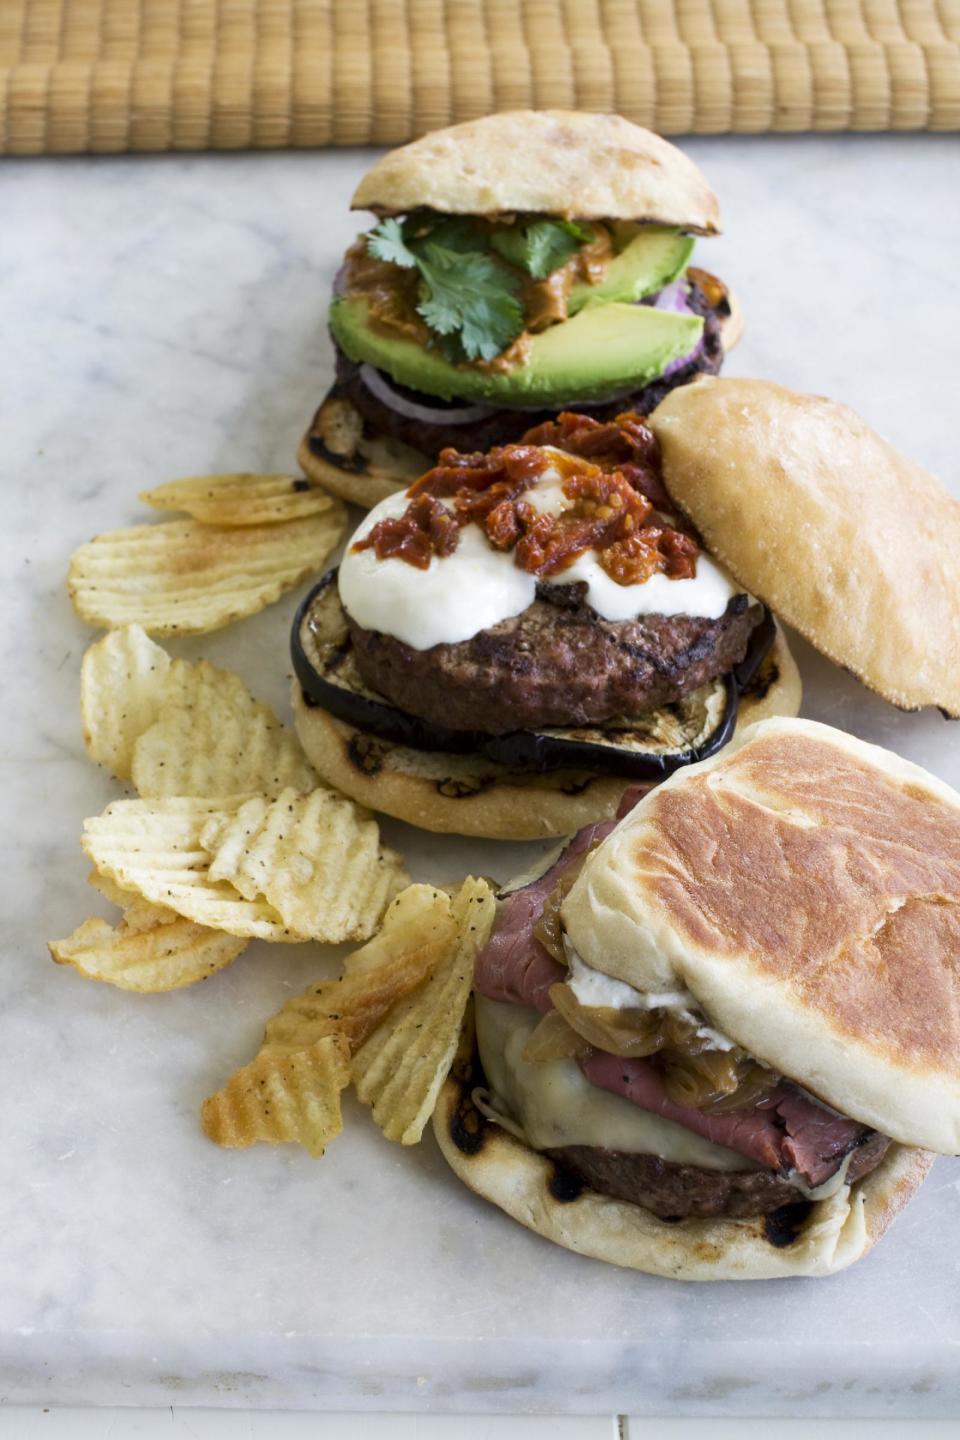 In this image taken on June 10, 2013, from front to rear, The New Yorker, The Eggplant Parm and The Thai, burgers are shown in Concord, N.H. (AP Photo/Matthew Mead)